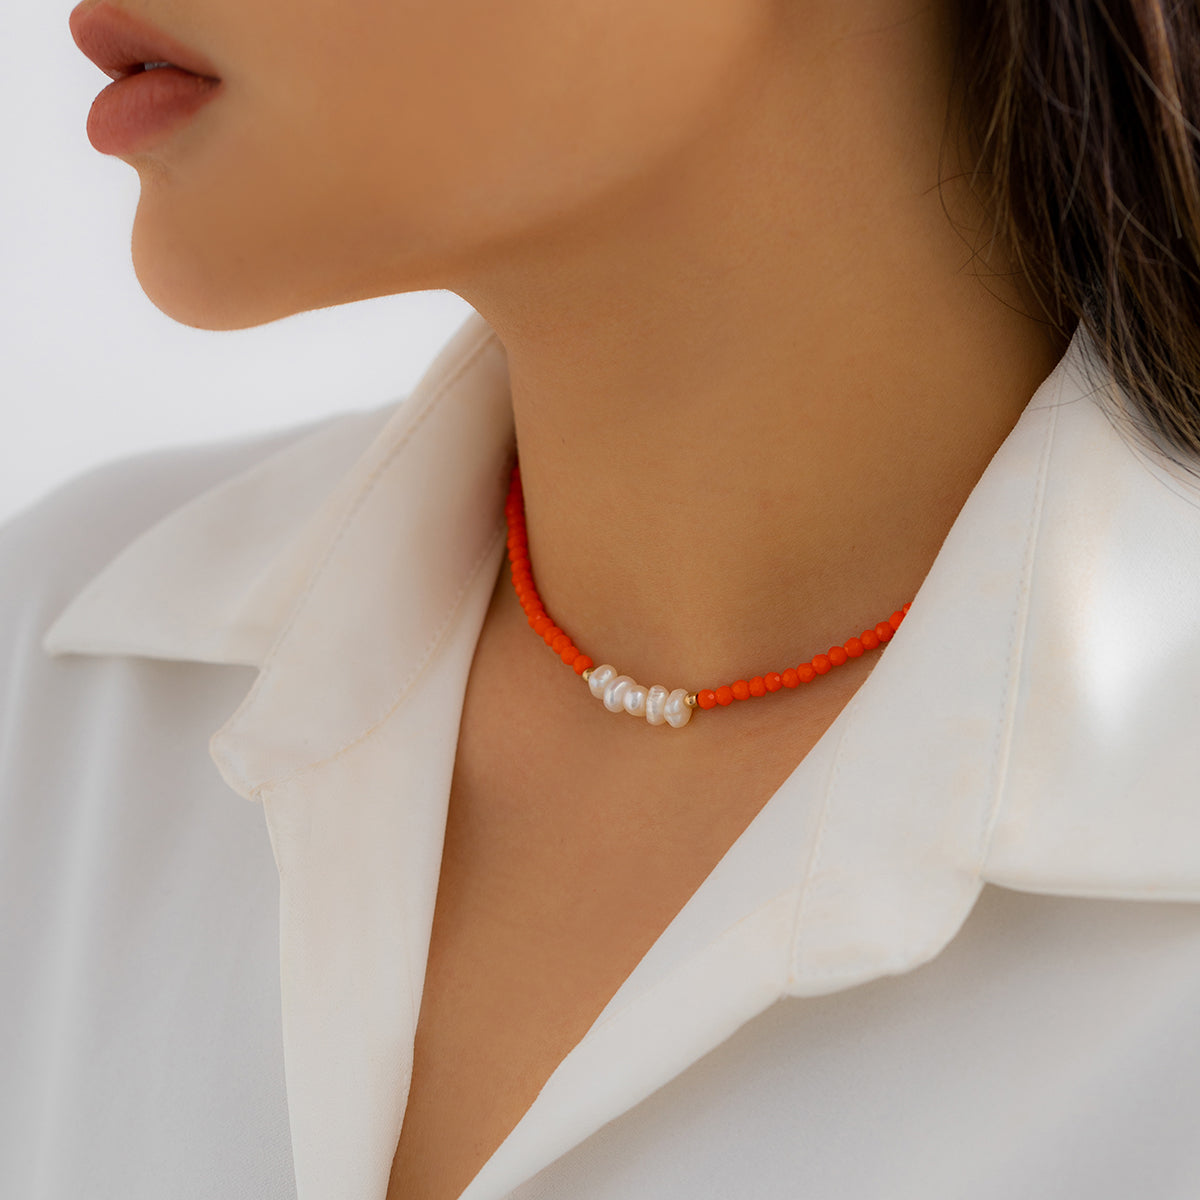 Tangerine Acrylic & Pearl 18K Gold-Plated Beaded Choker Necklace